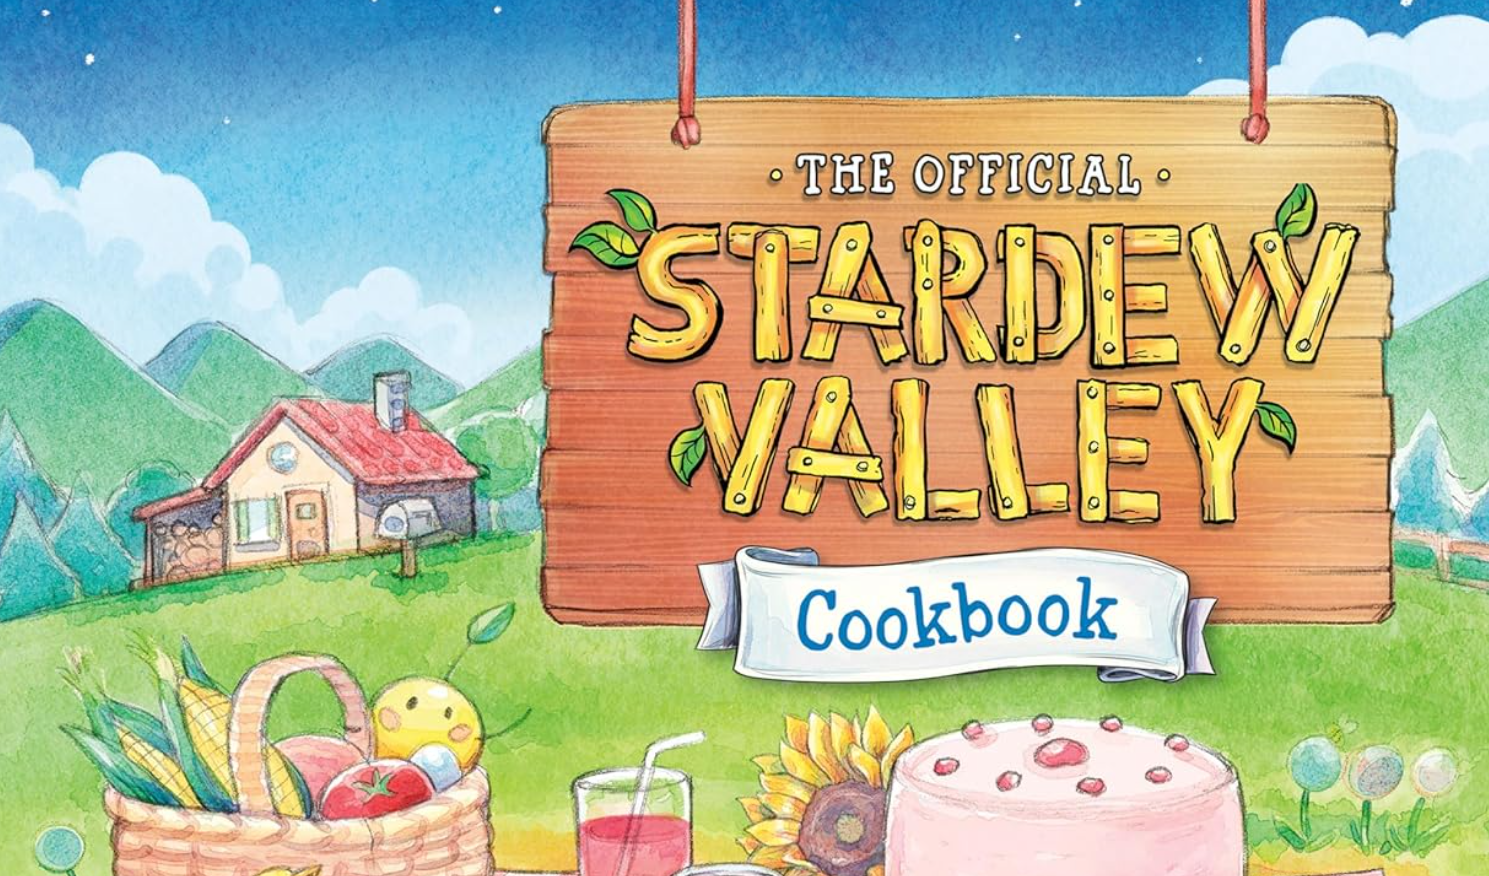 Must-Try Dishes from 'The Official Stardew Valley Cookbook' for Each Season